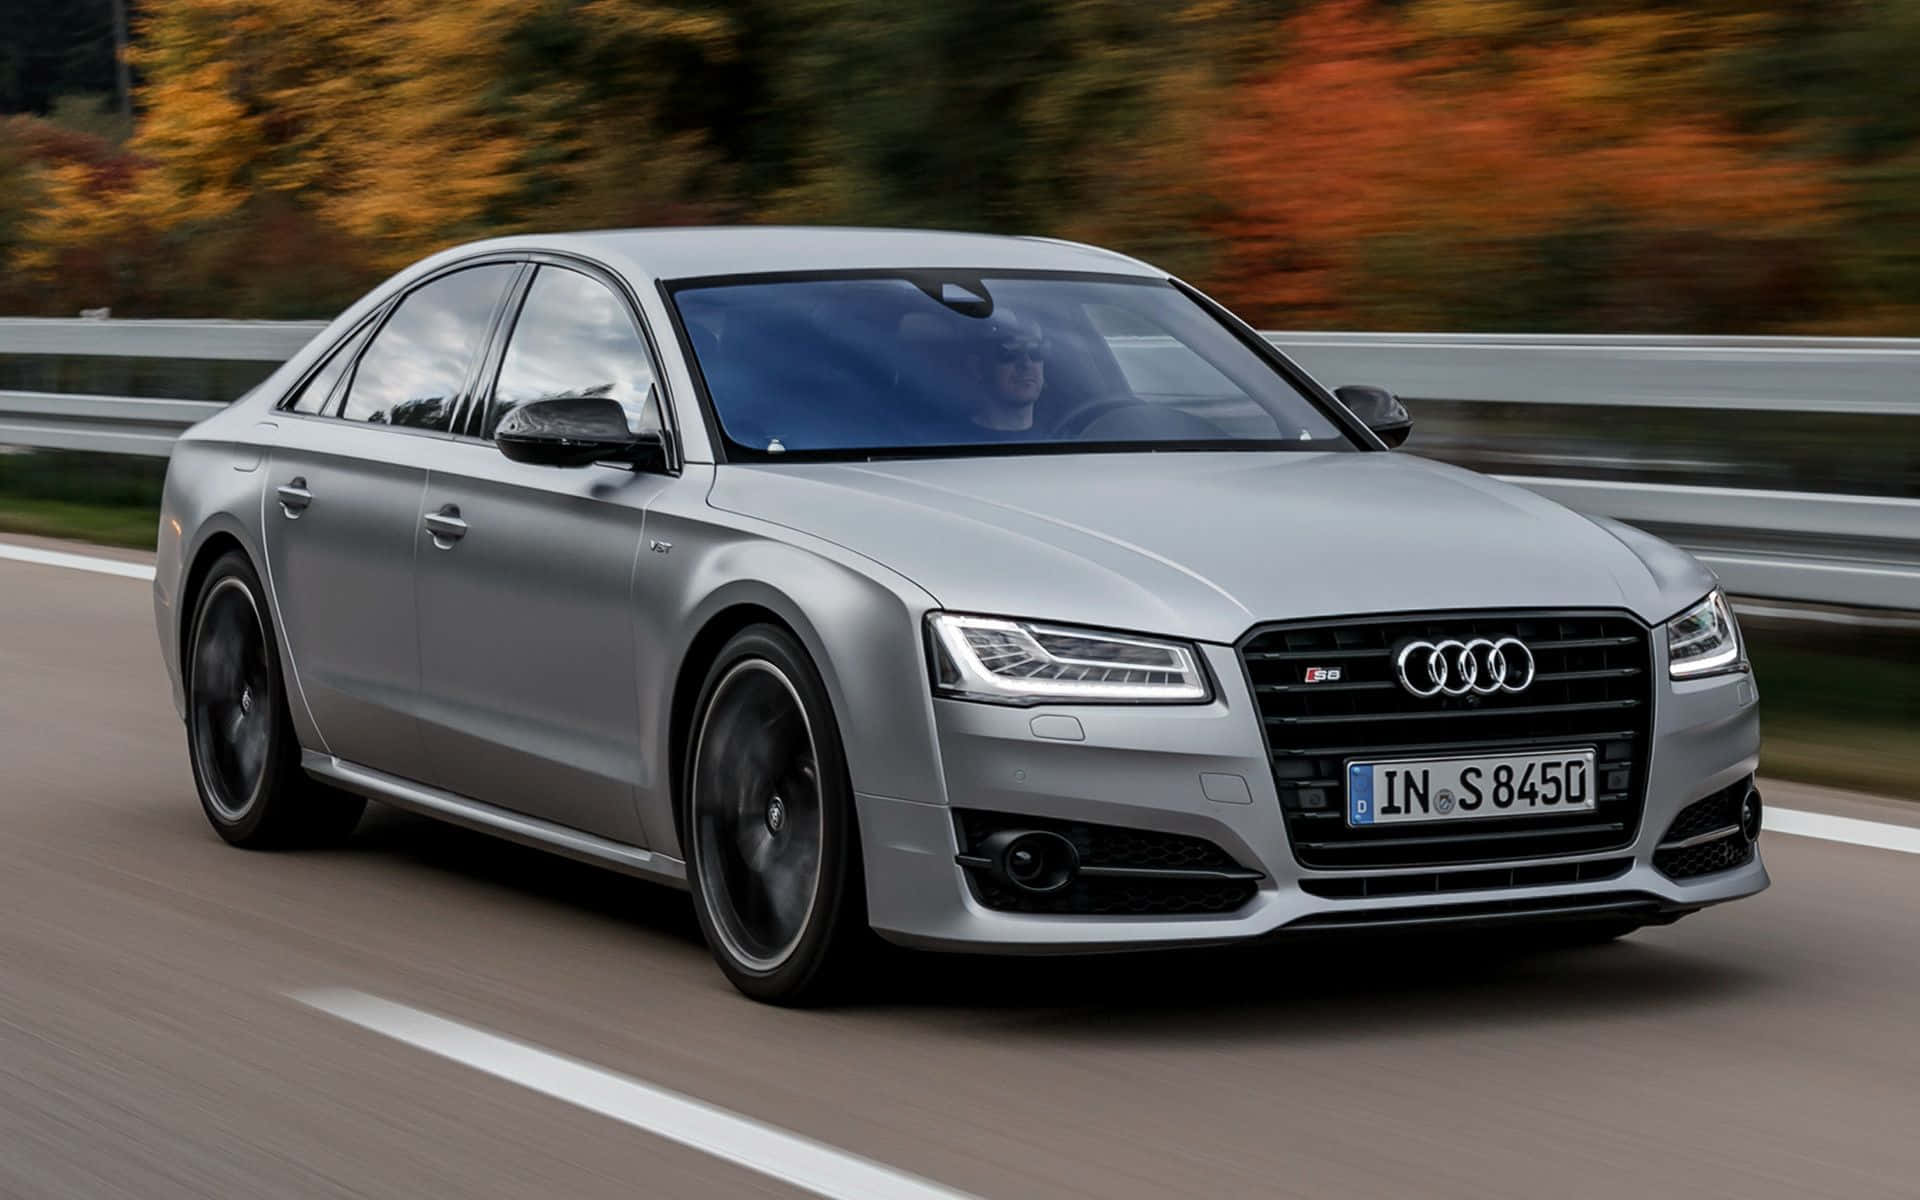 The luxurious and powerful Audi S8 in motion Wallpaper